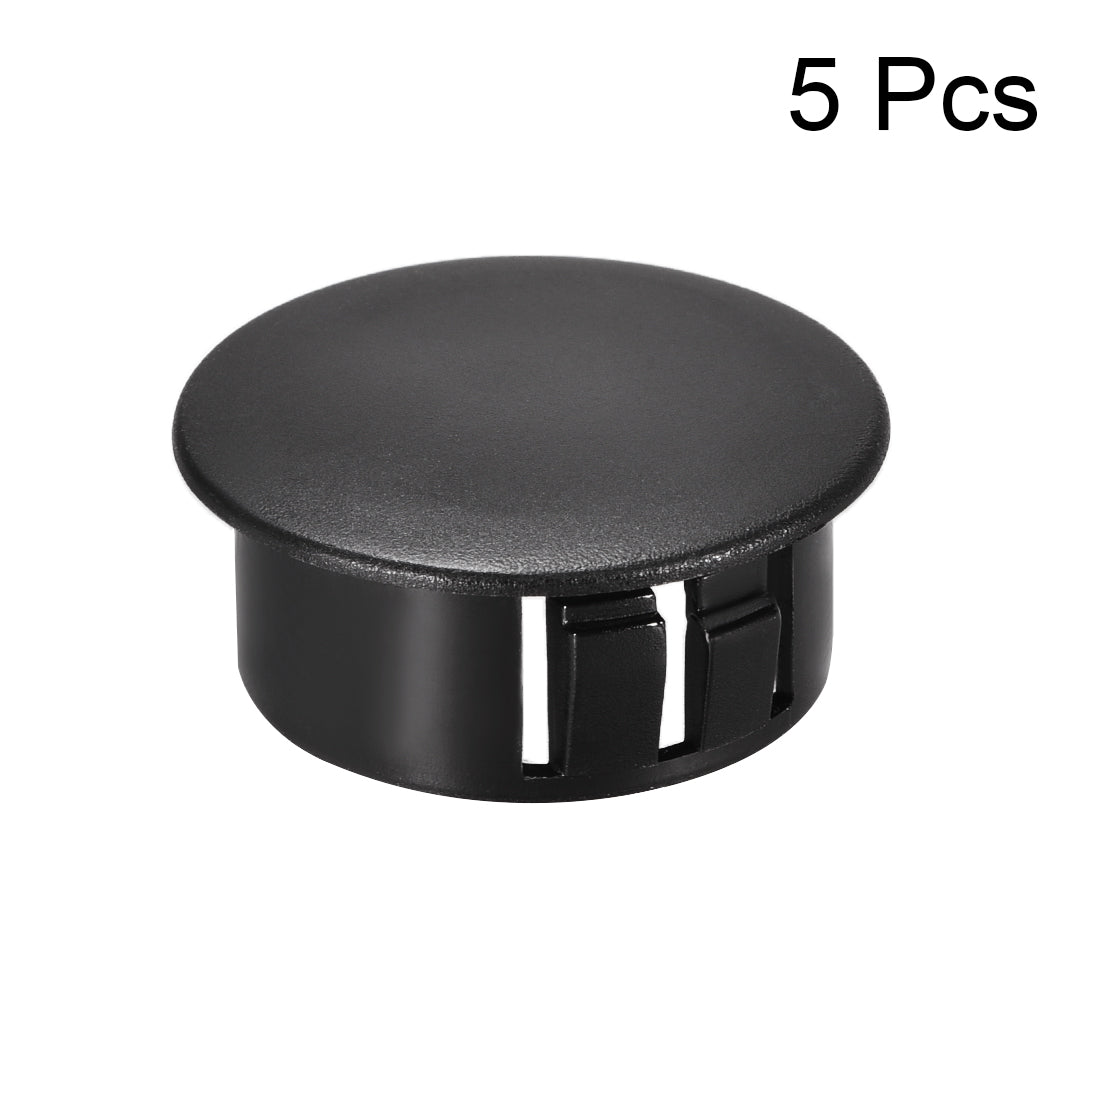 uxcell Uxcell 5pcs Mounting 25mm x 11mm Black Nylon Round Snap Panel Locking Hole Plugs Cover